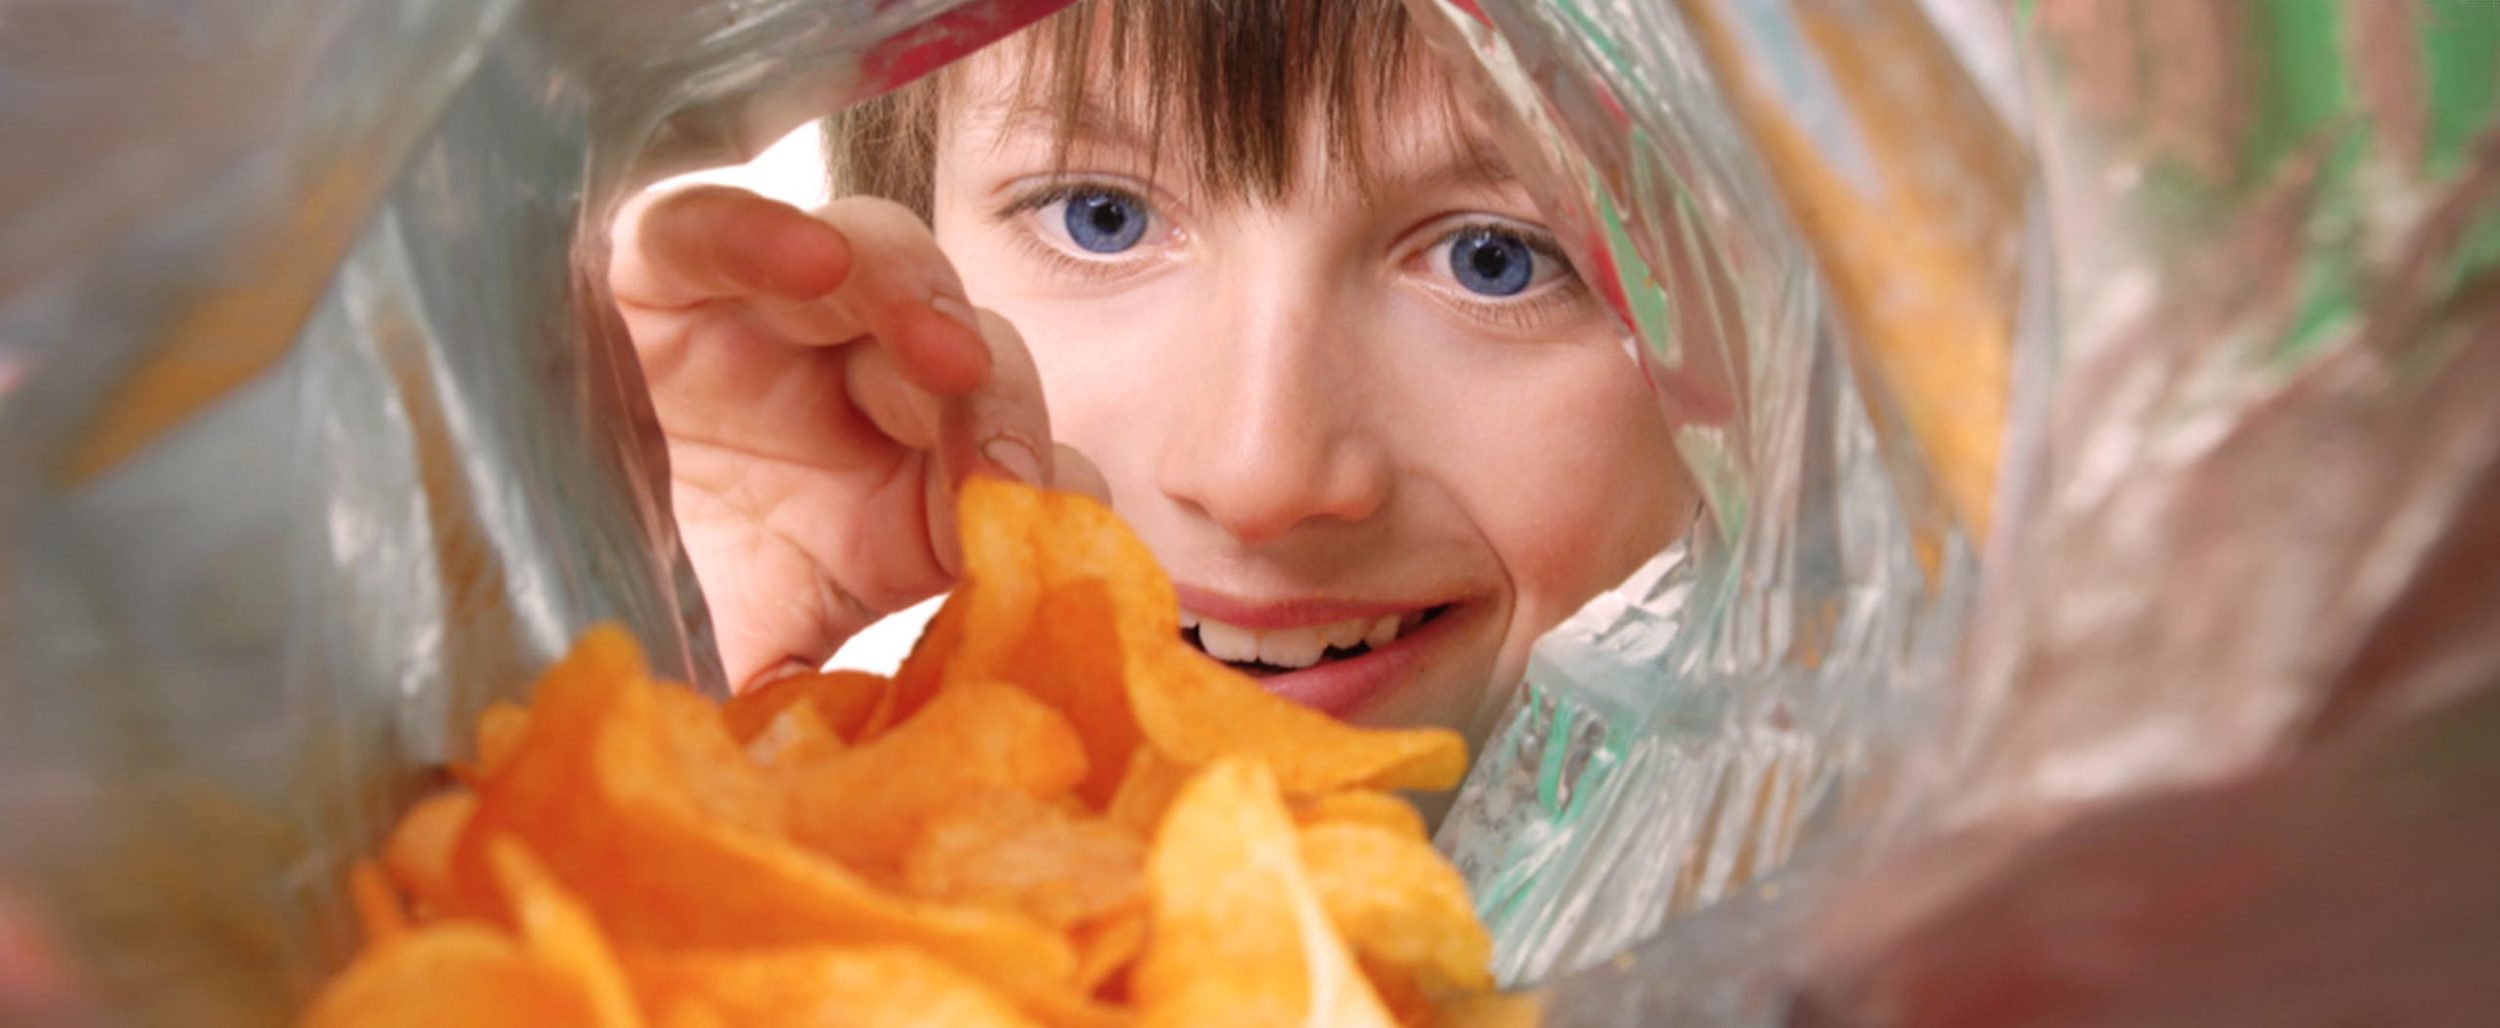 Photo of lady looking inside of the potato chips bag, reaching in for a chip. Shot from the inside of the bag perspective